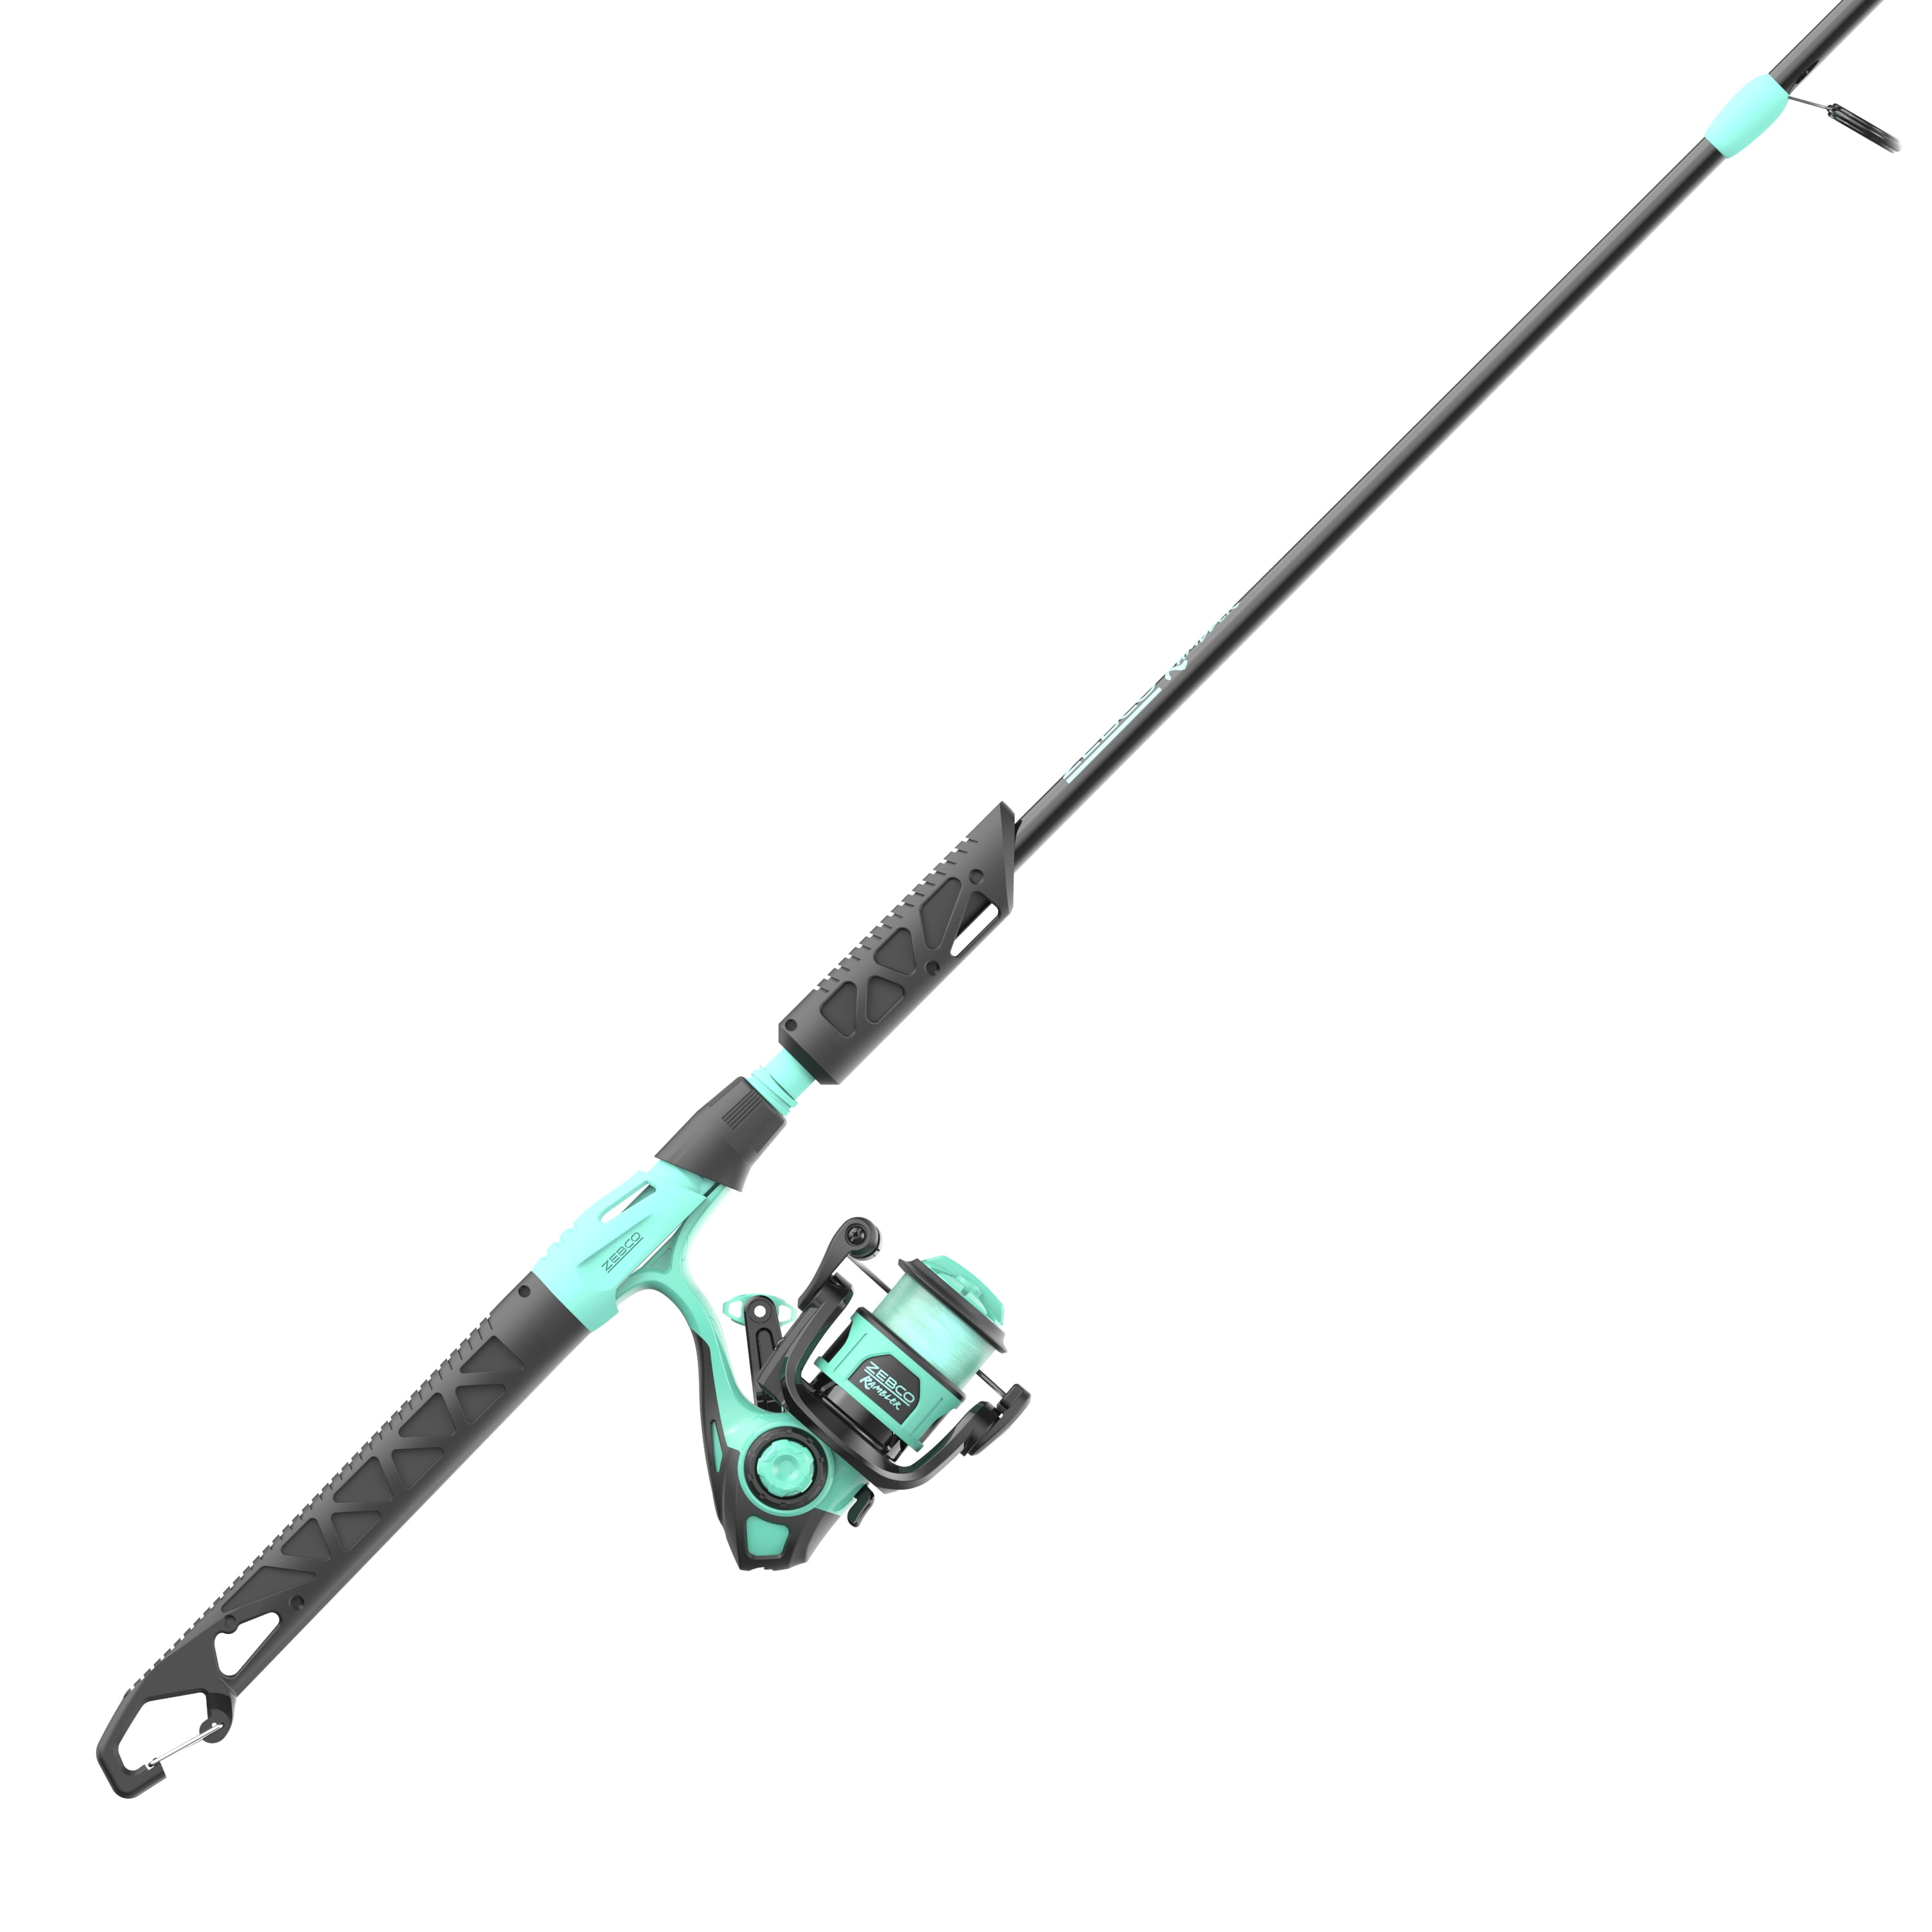 Details about   5-Foot 6-in 2-Piece Rod Bl Zebco Slingshot Spincast Reel and Fishing Rod Combo 